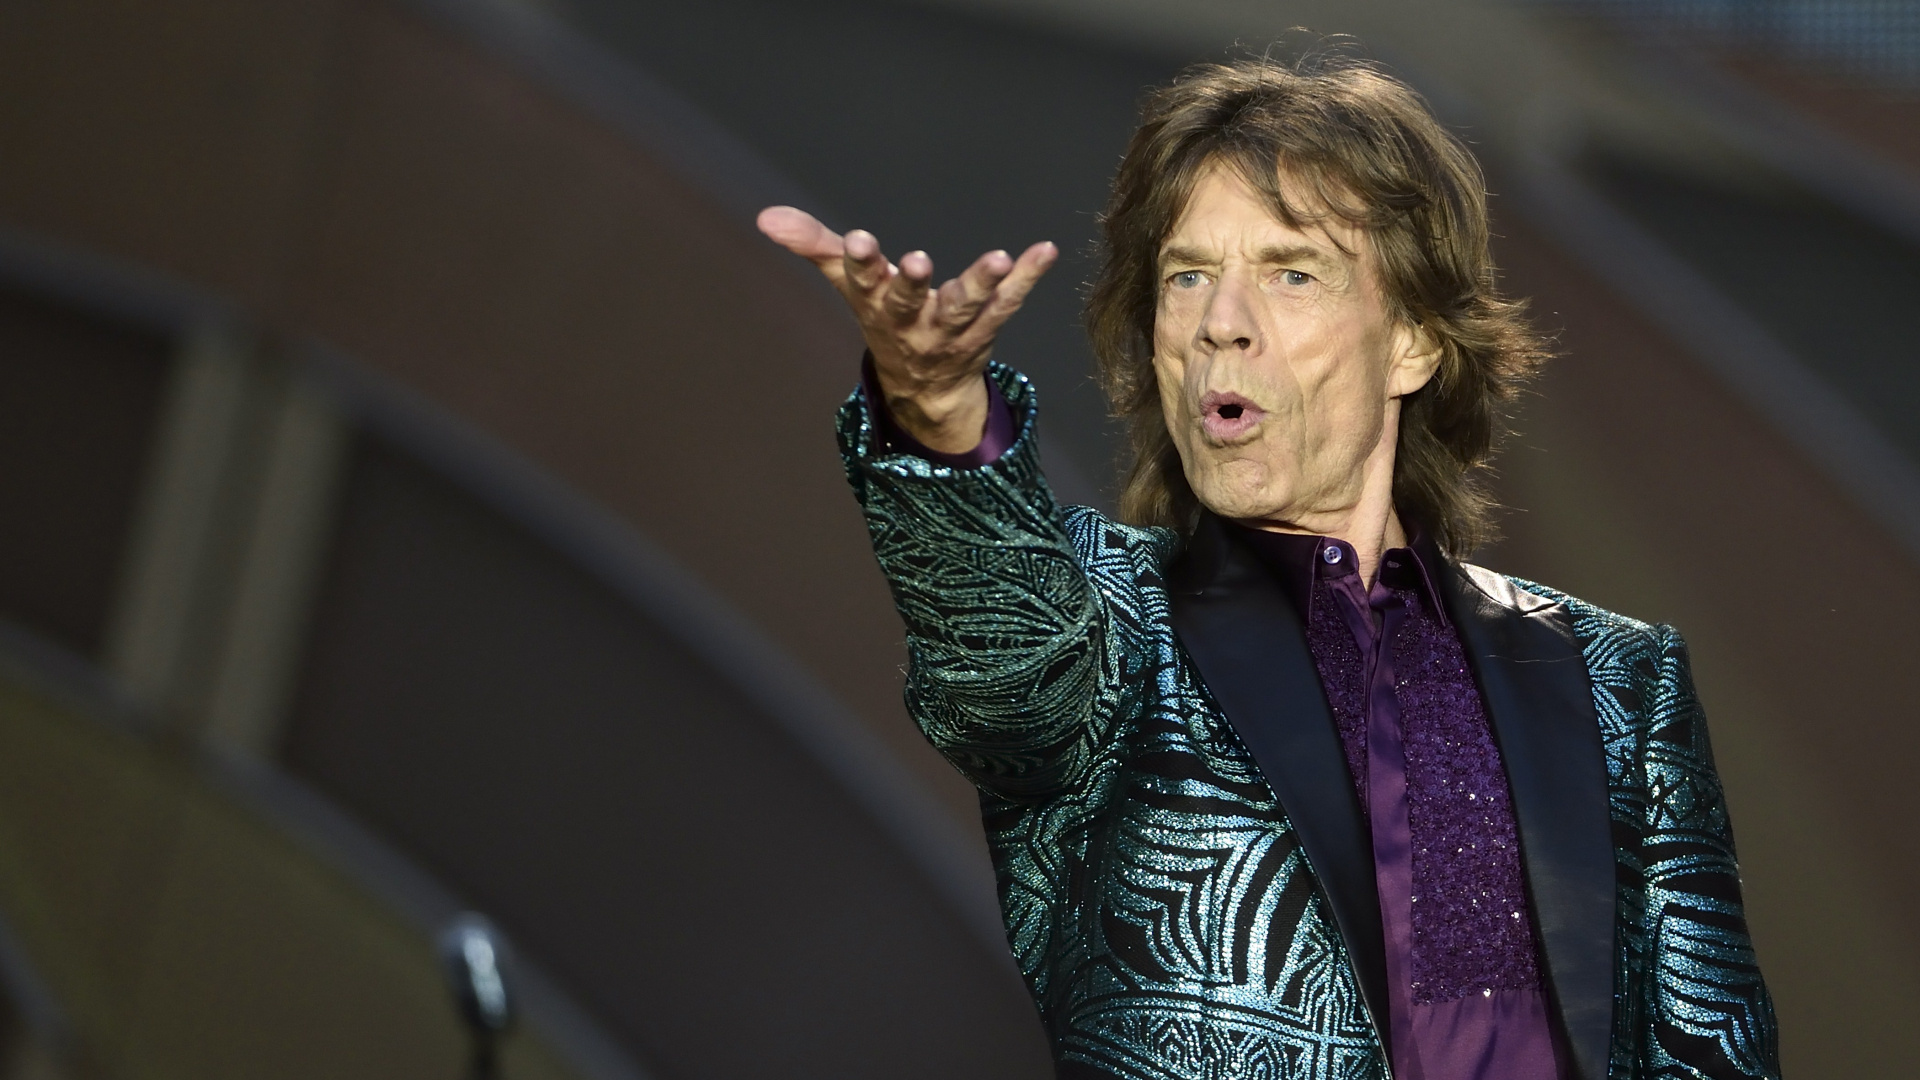 Mick Jagger, Free download wallpapers, Rolling Stones photos, Tablet backgrounds, 1920x1080 Full HD Desktop